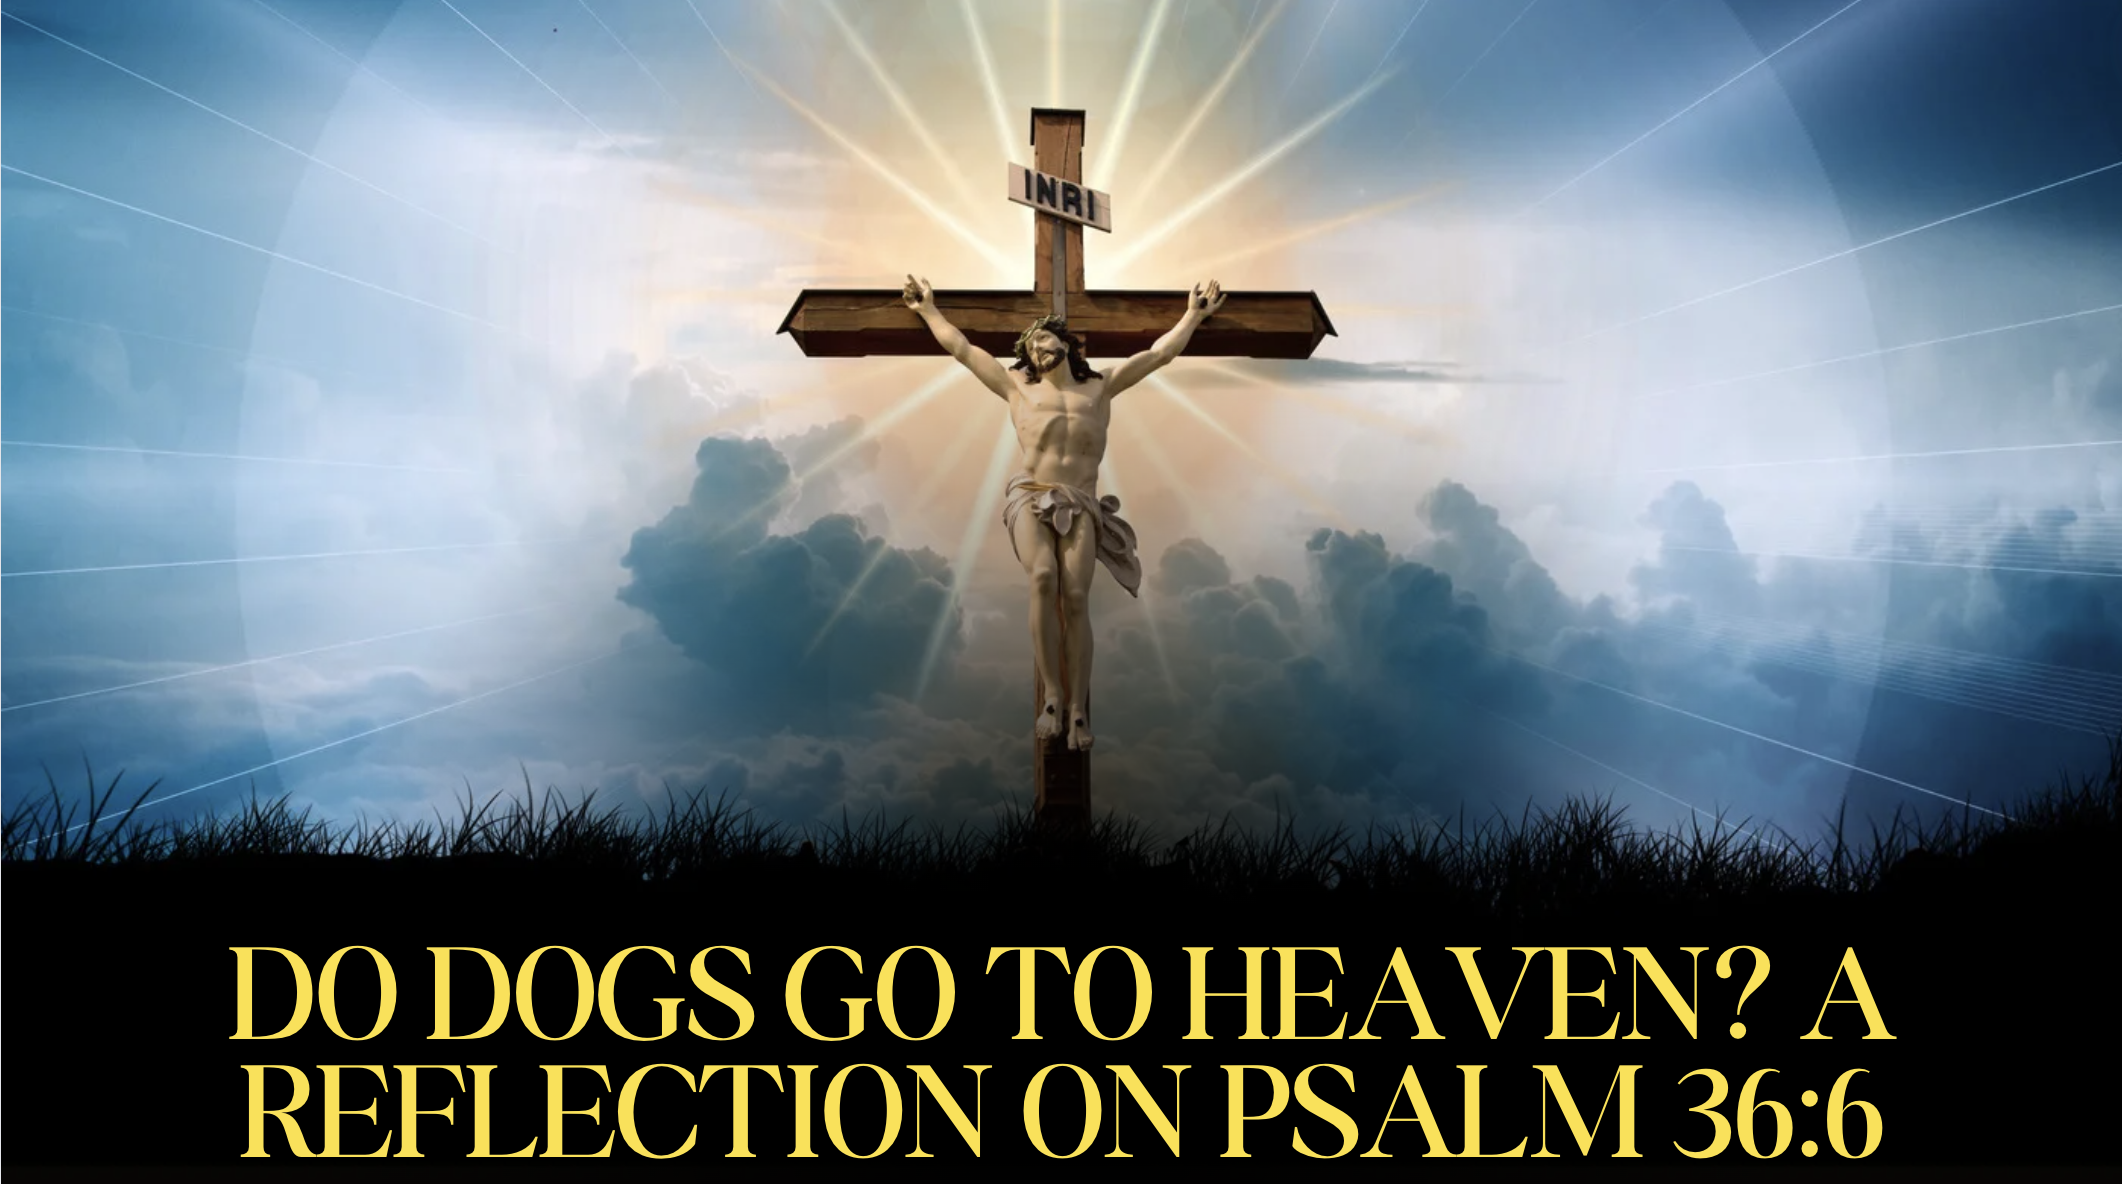 Do Dogs Go to Heaven? A Reflection on Psalm 36:6